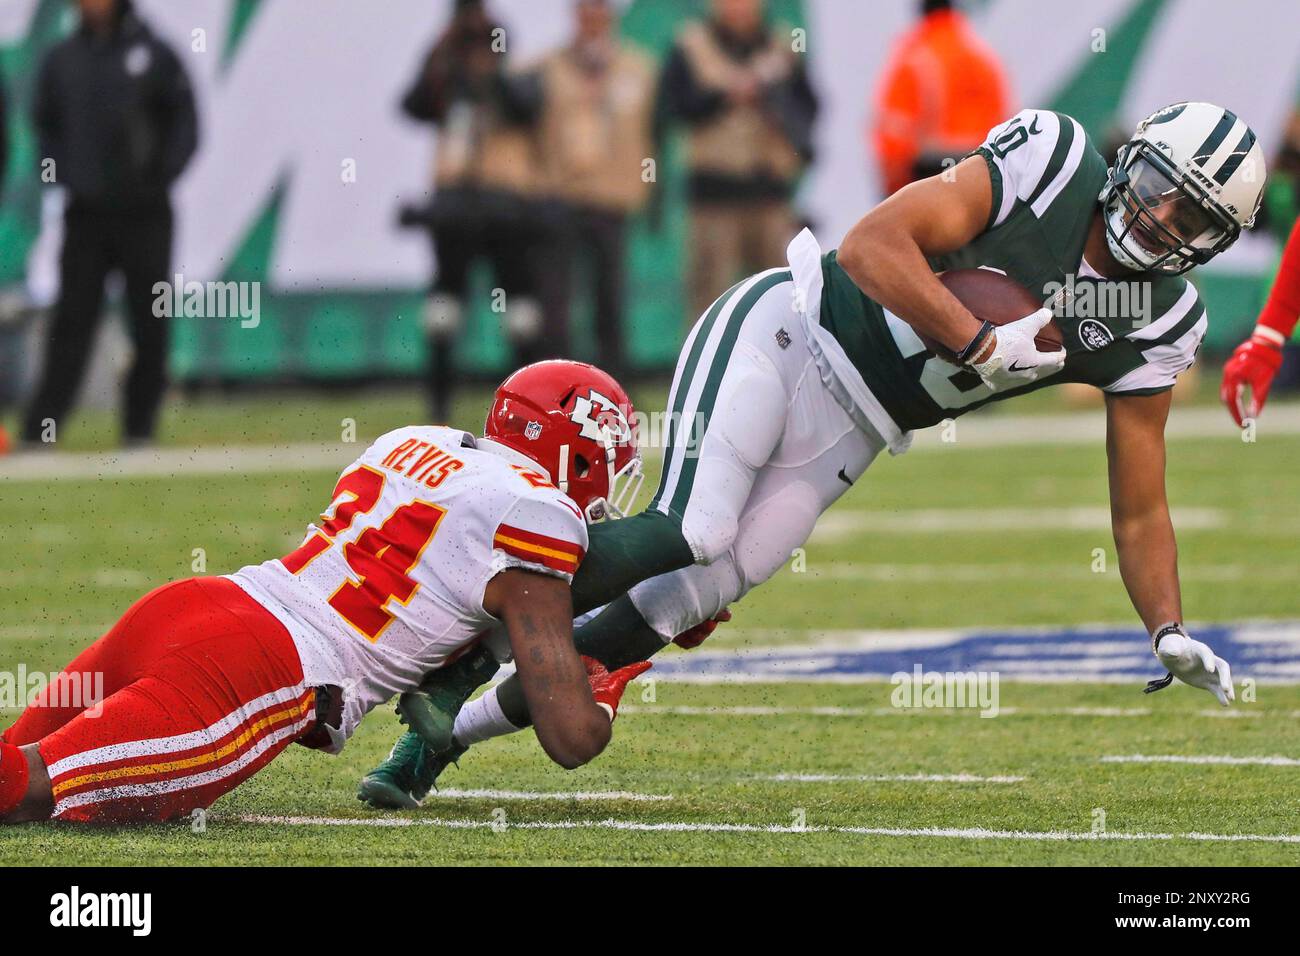 Kansas City Chiefs' Darrelle Revis, left, tackles New York Jets' Jermaine  Kearse during the first half of an NFL football game, Sunday, Dec. 3, 2017,  in East Rutherford, N.J. (AP Photo/Julie Jacobson